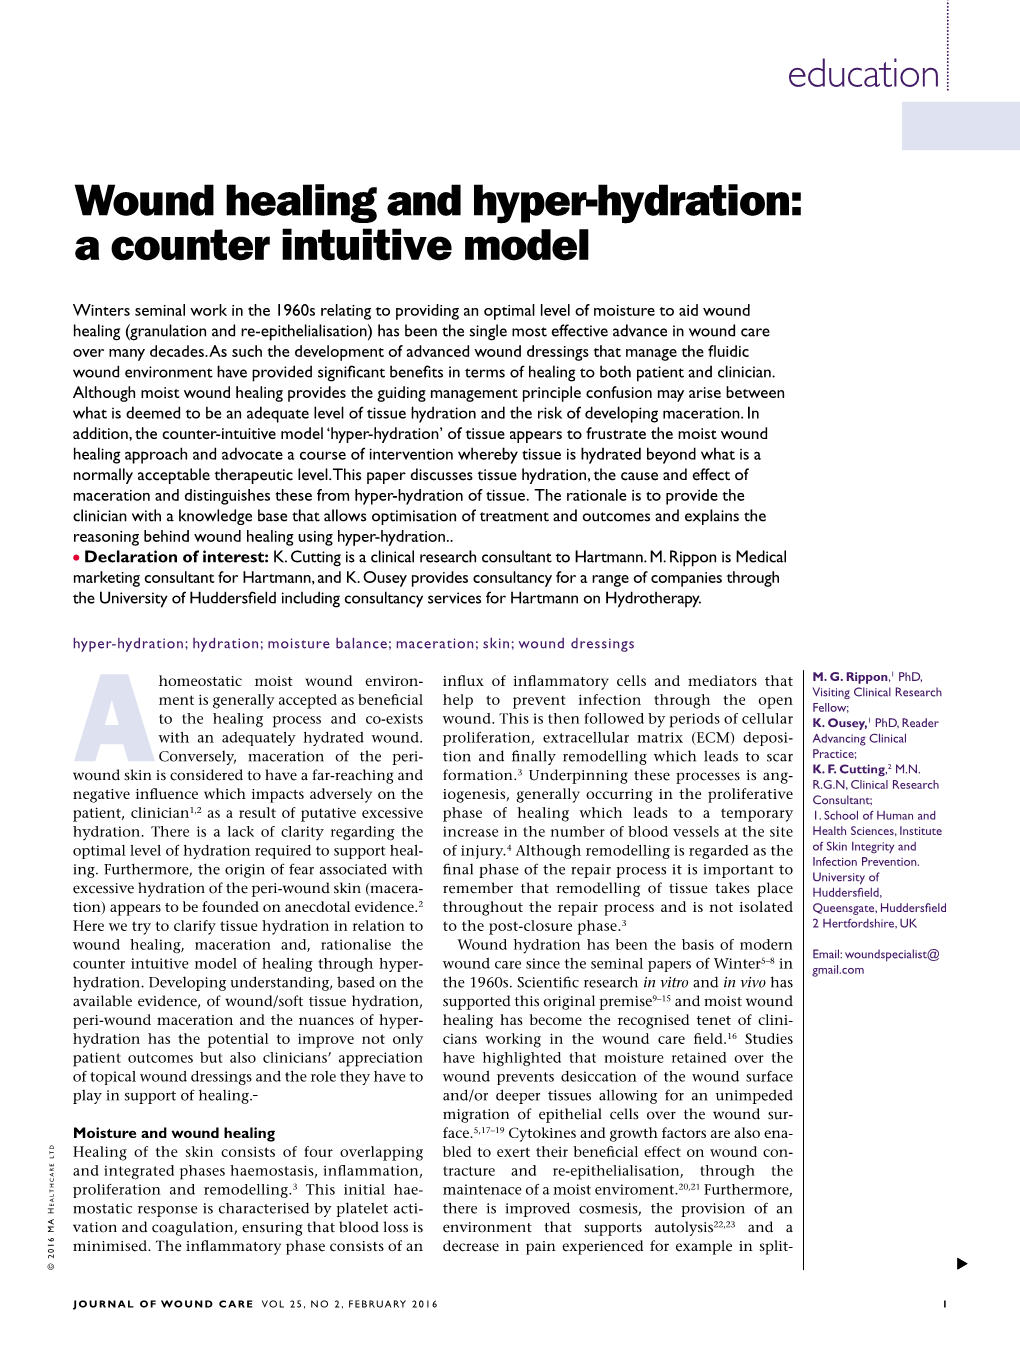 Wound Healing and Hyper-Hydration: a Counter Intuitive Model